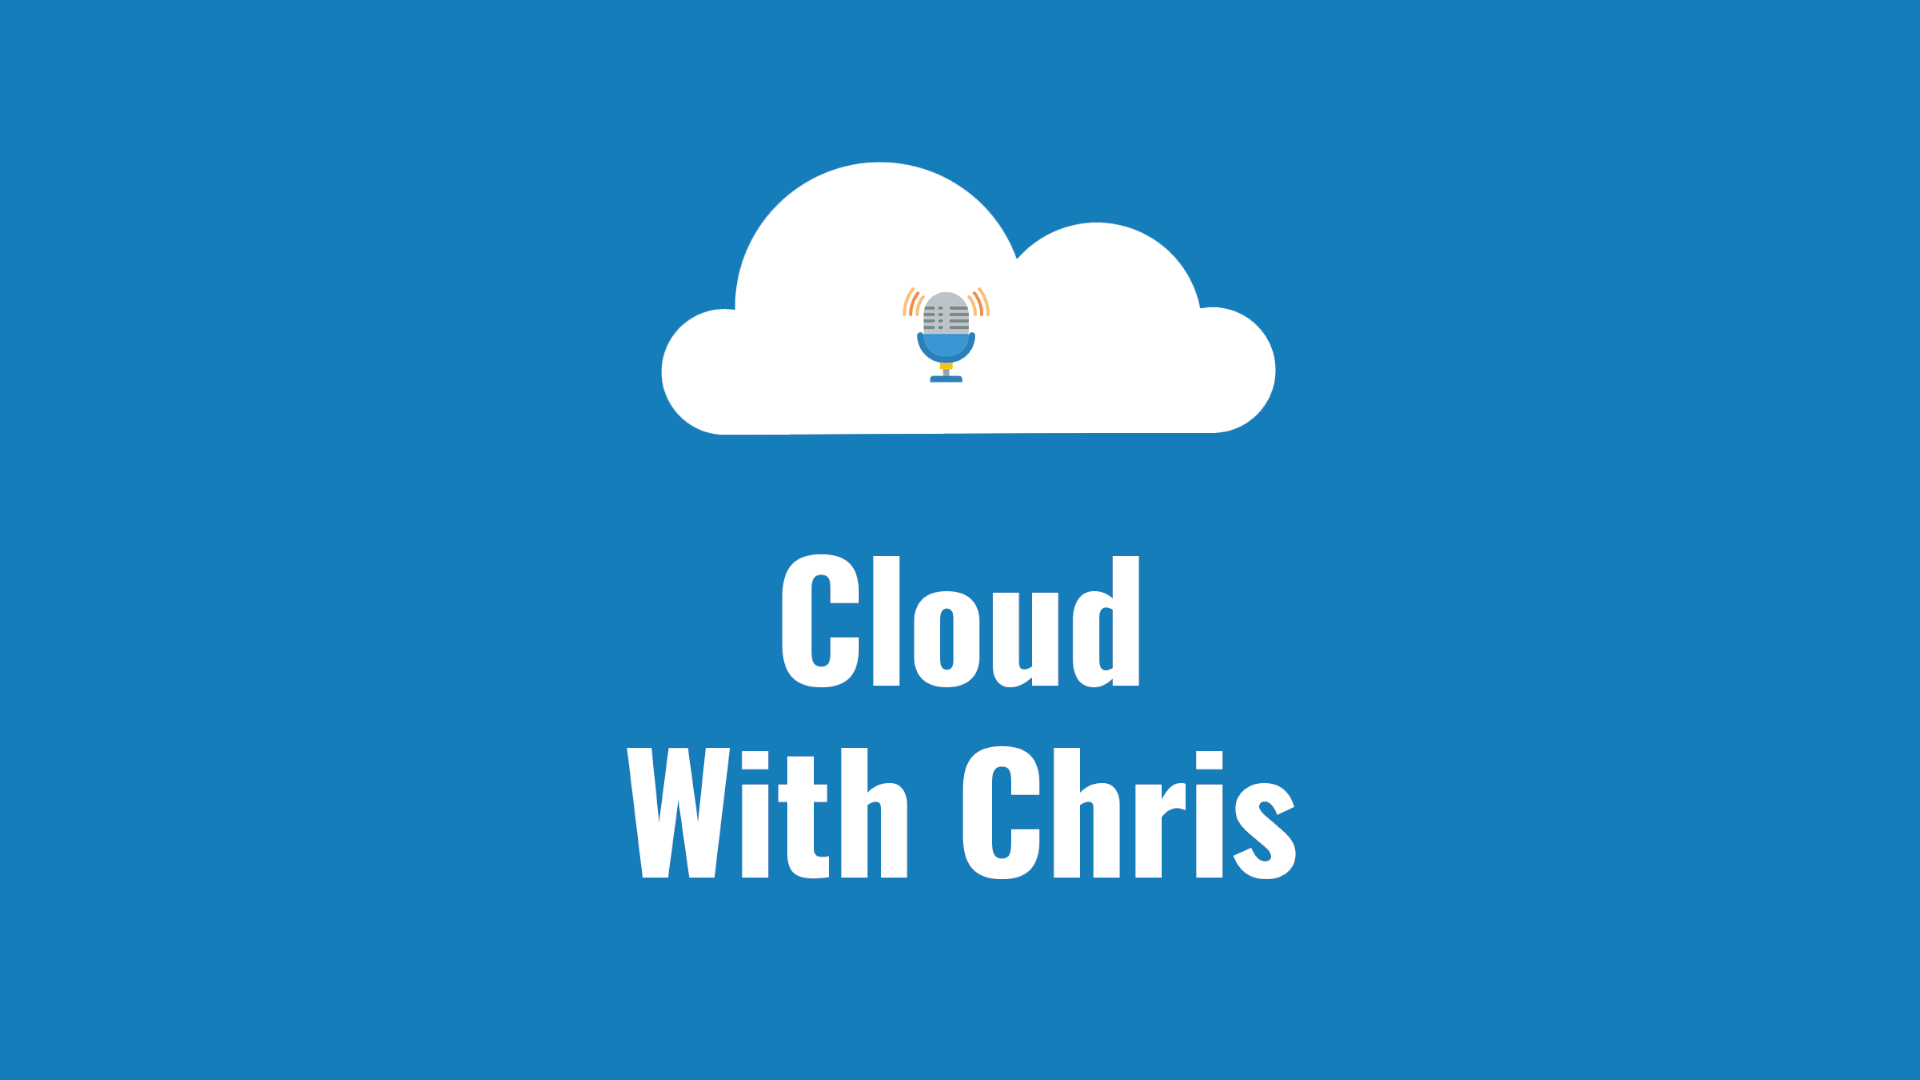 10 - Exploring GitHub Actions to deploy Static Content and Azure Functions | Cloud with Chris